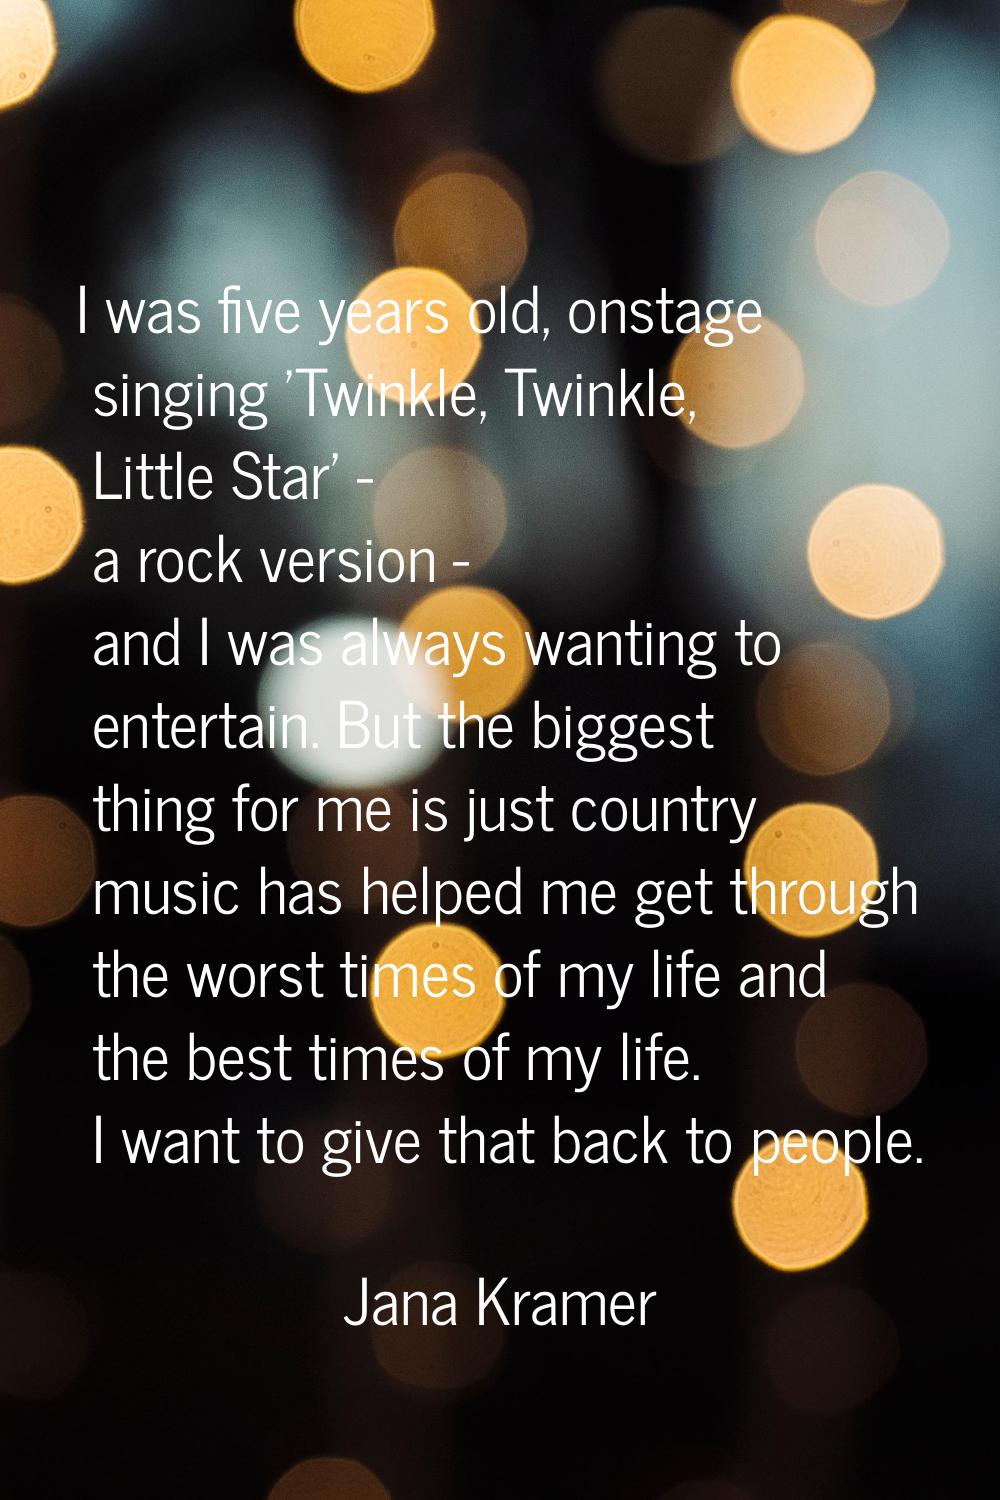 I was five years old, onstage singing 'Twinkle, Twinkle, Little Star' - a rock version - and I was 